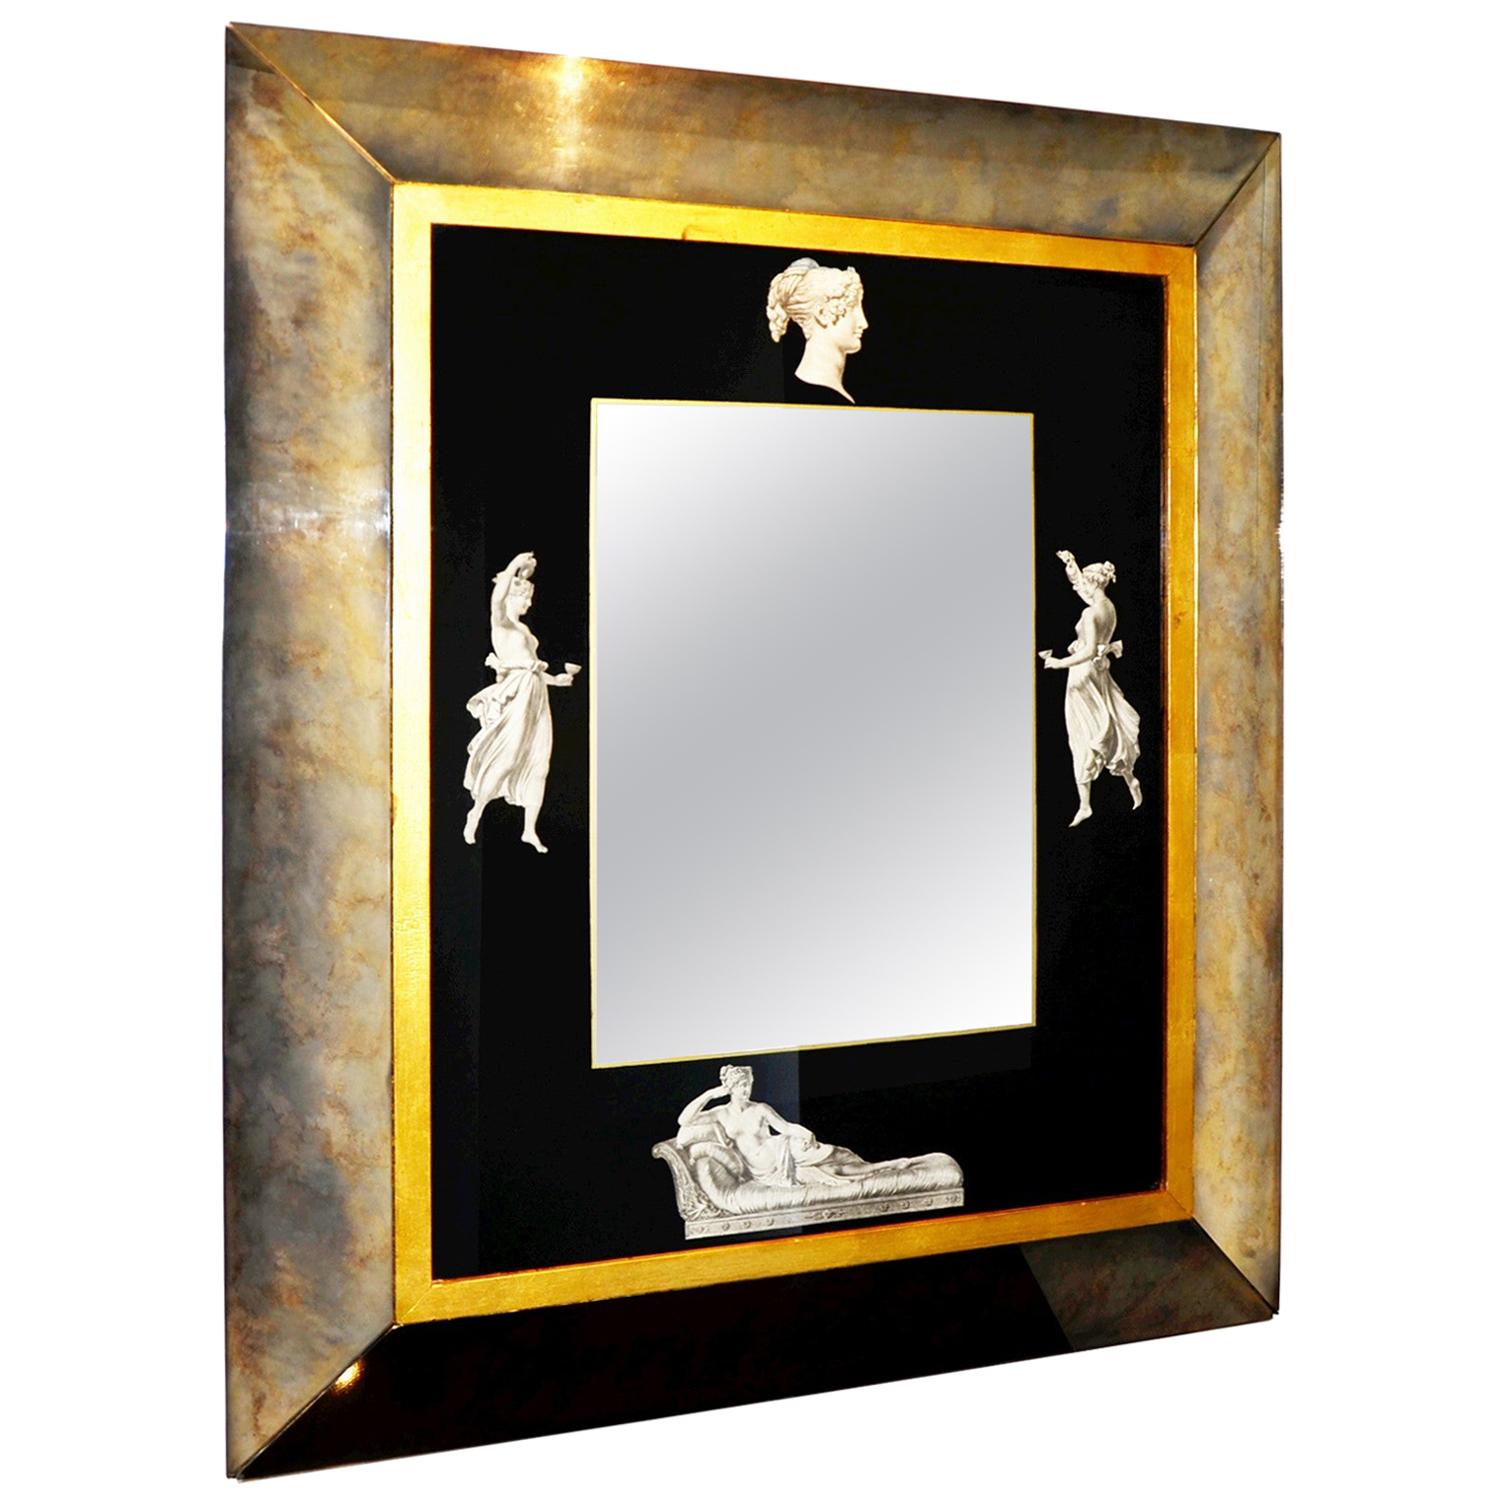 Black and Gold with White Grecian Figures Neoclassical Verre Églomisé Mirror For Sale